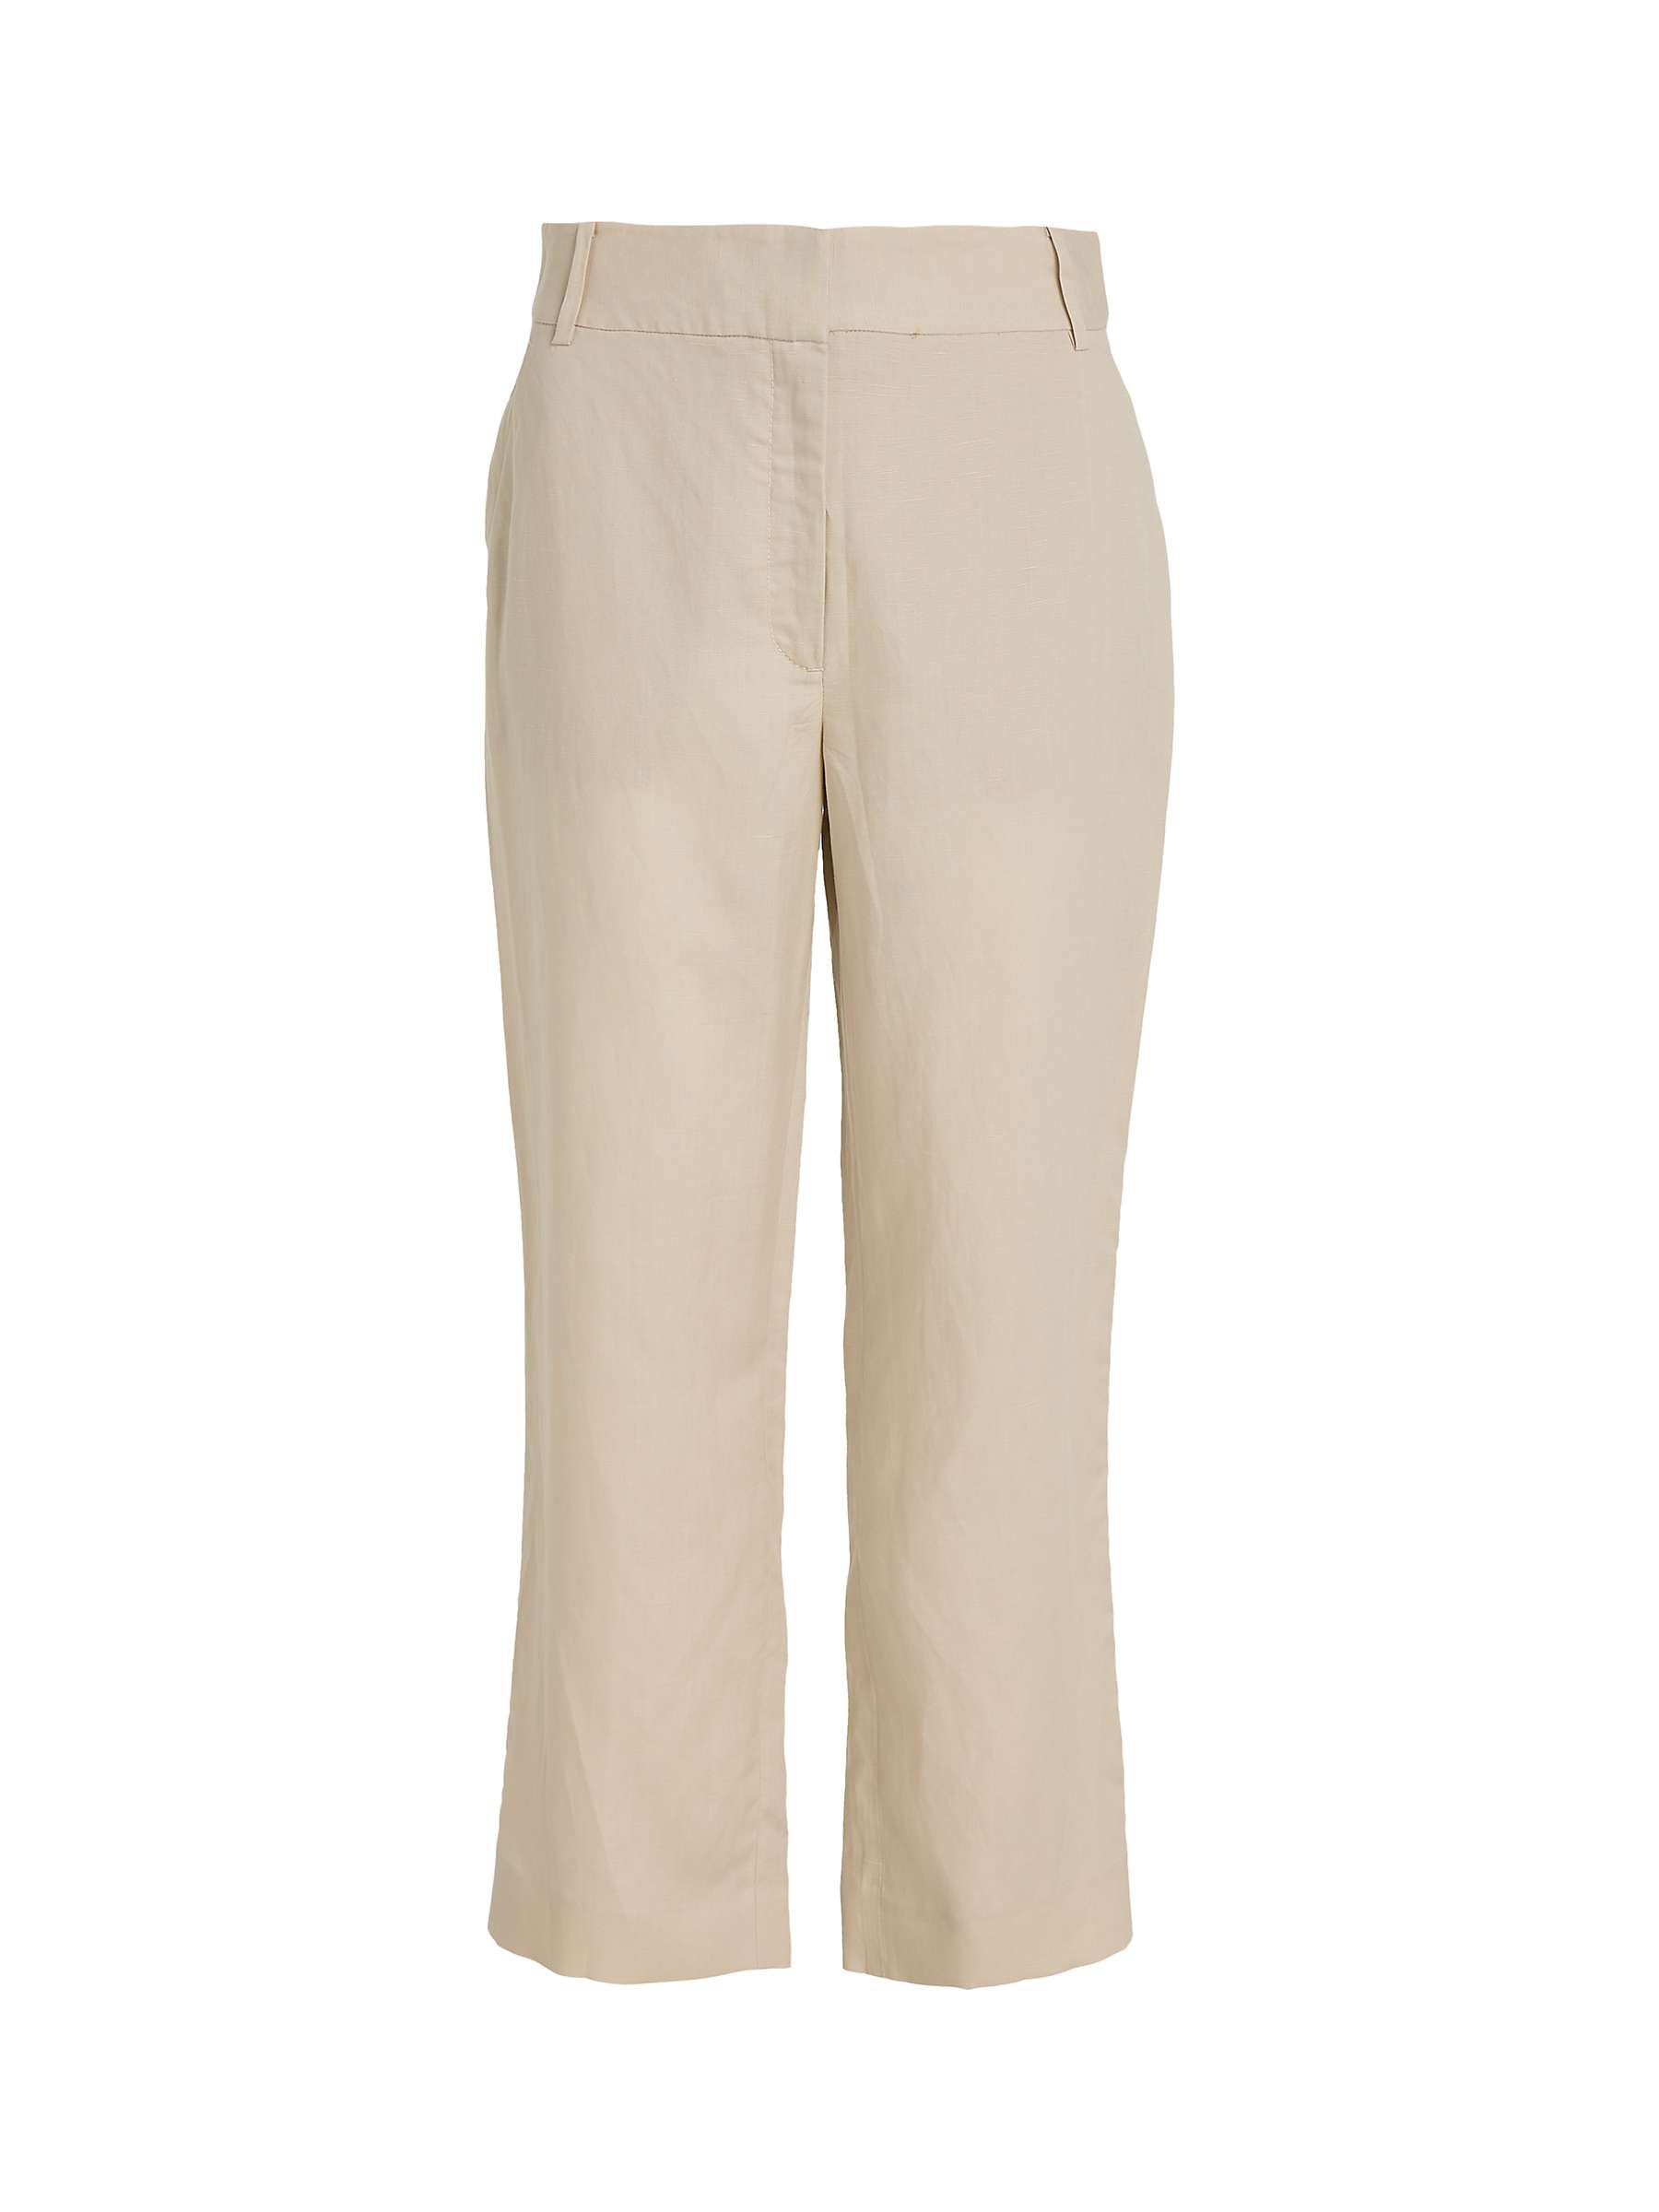 Buy Calvin Klein Straight Cropped Trousers, Peyote Online at johnlewis.com